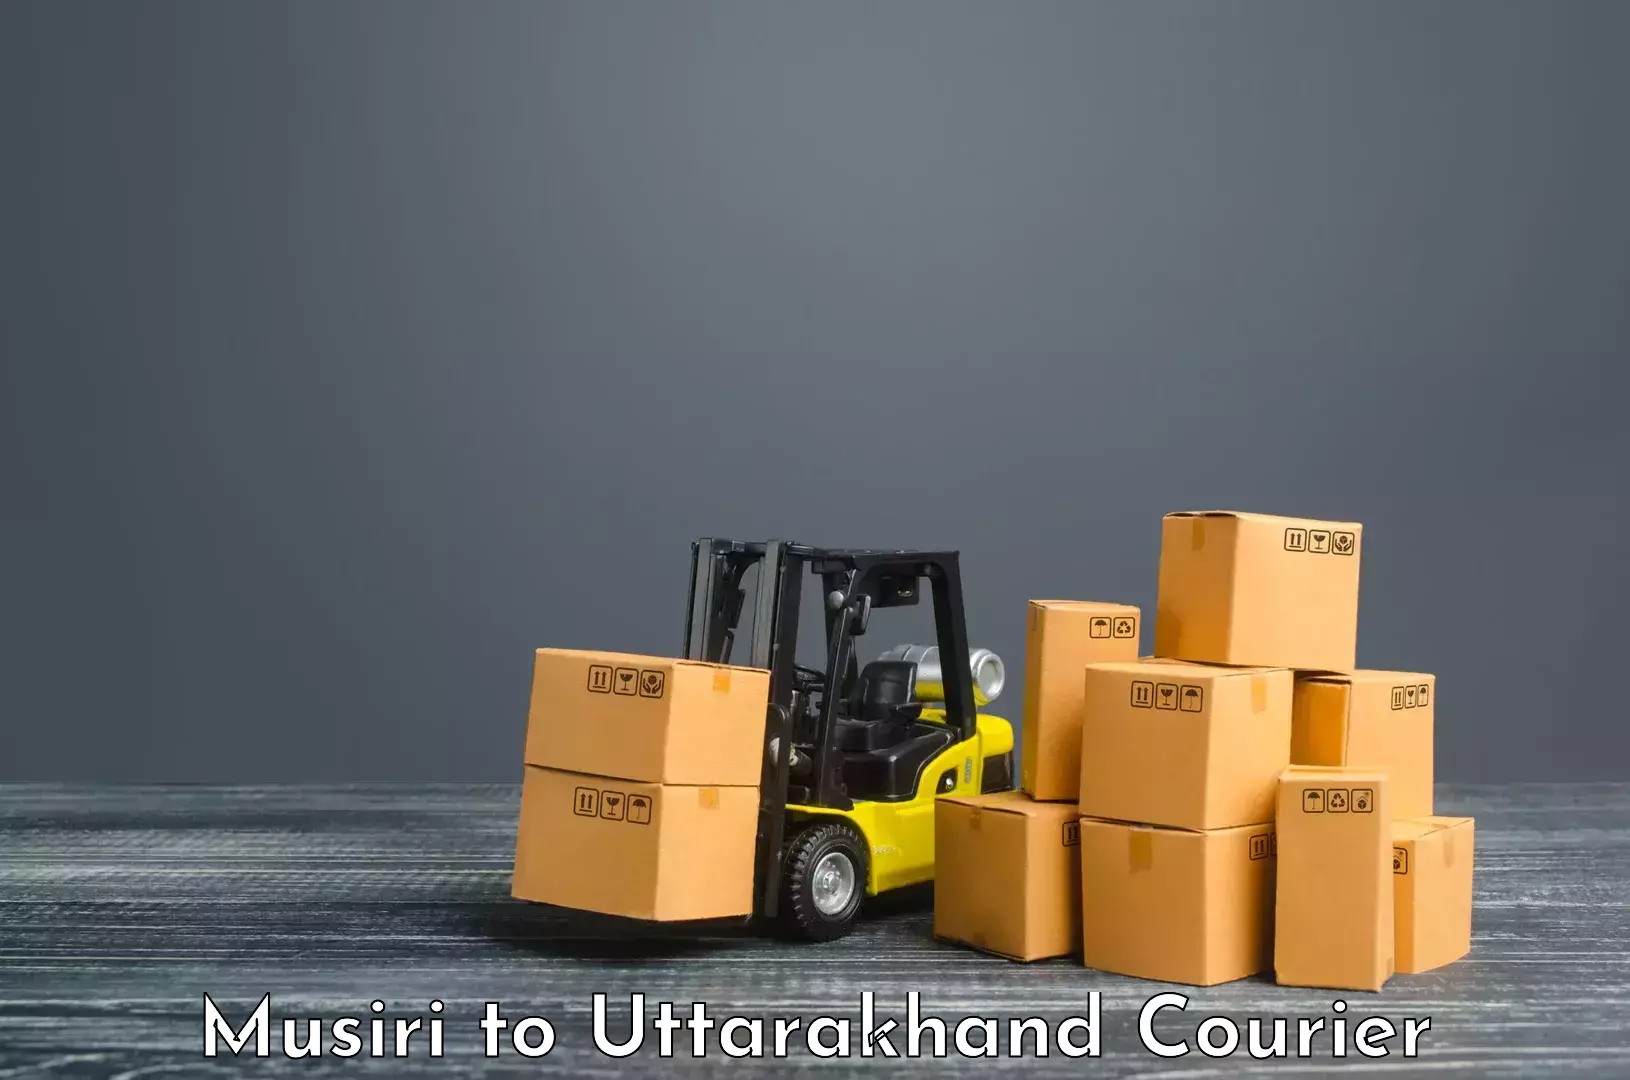 Cash on delivery service Musiri to Uttarakhand